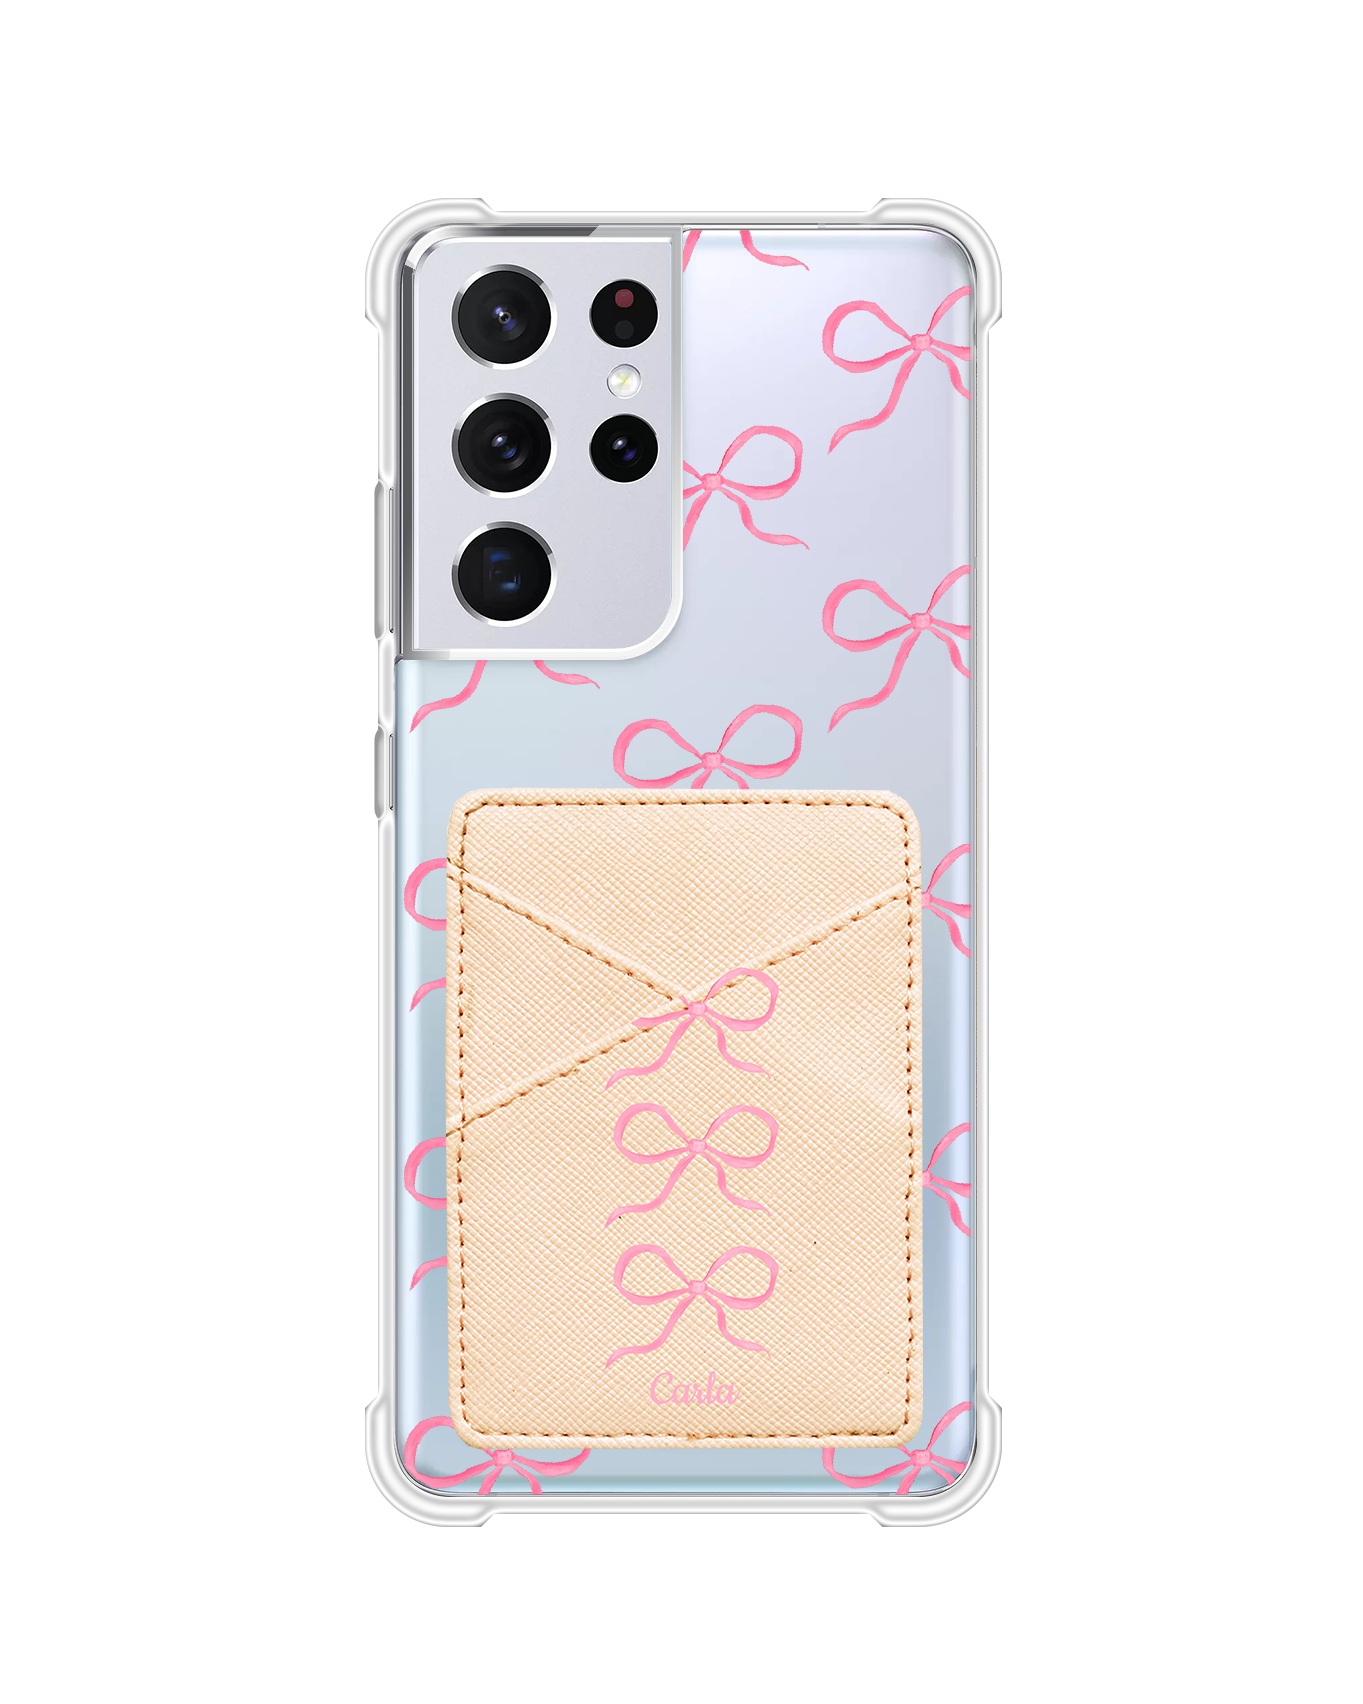 Android Phone Wallet Case - Coquette Pink Bow 2.0